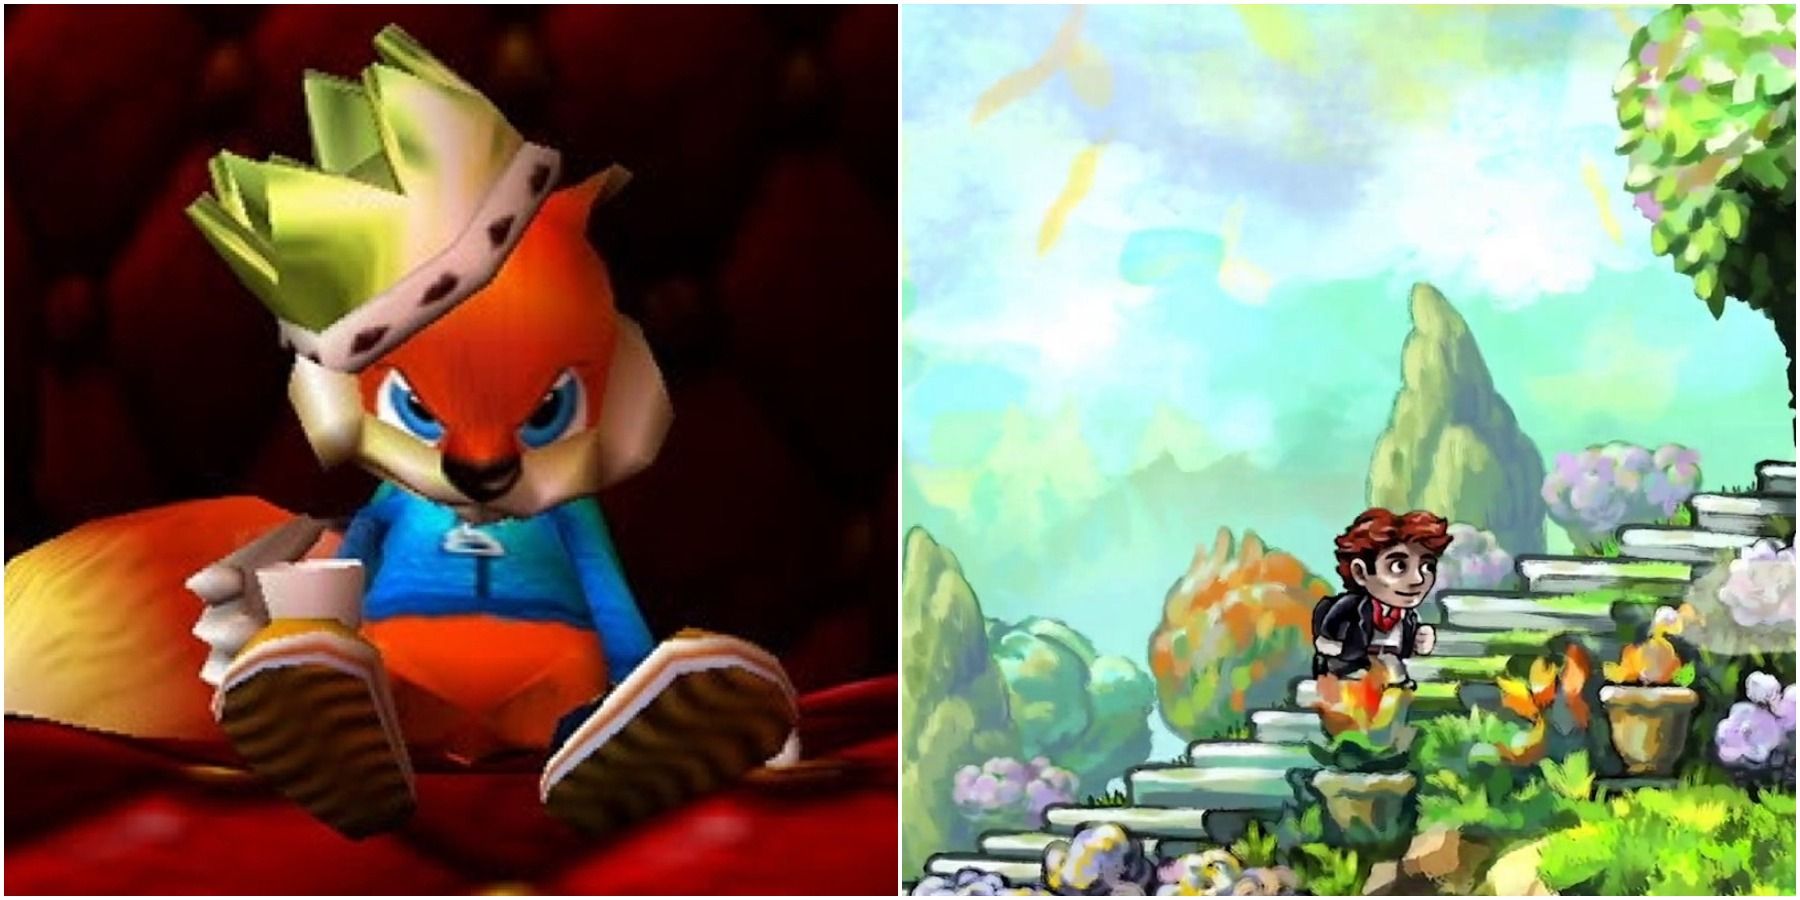 (Left) Conker with a crown (Right) Braid protagonist running up stairs